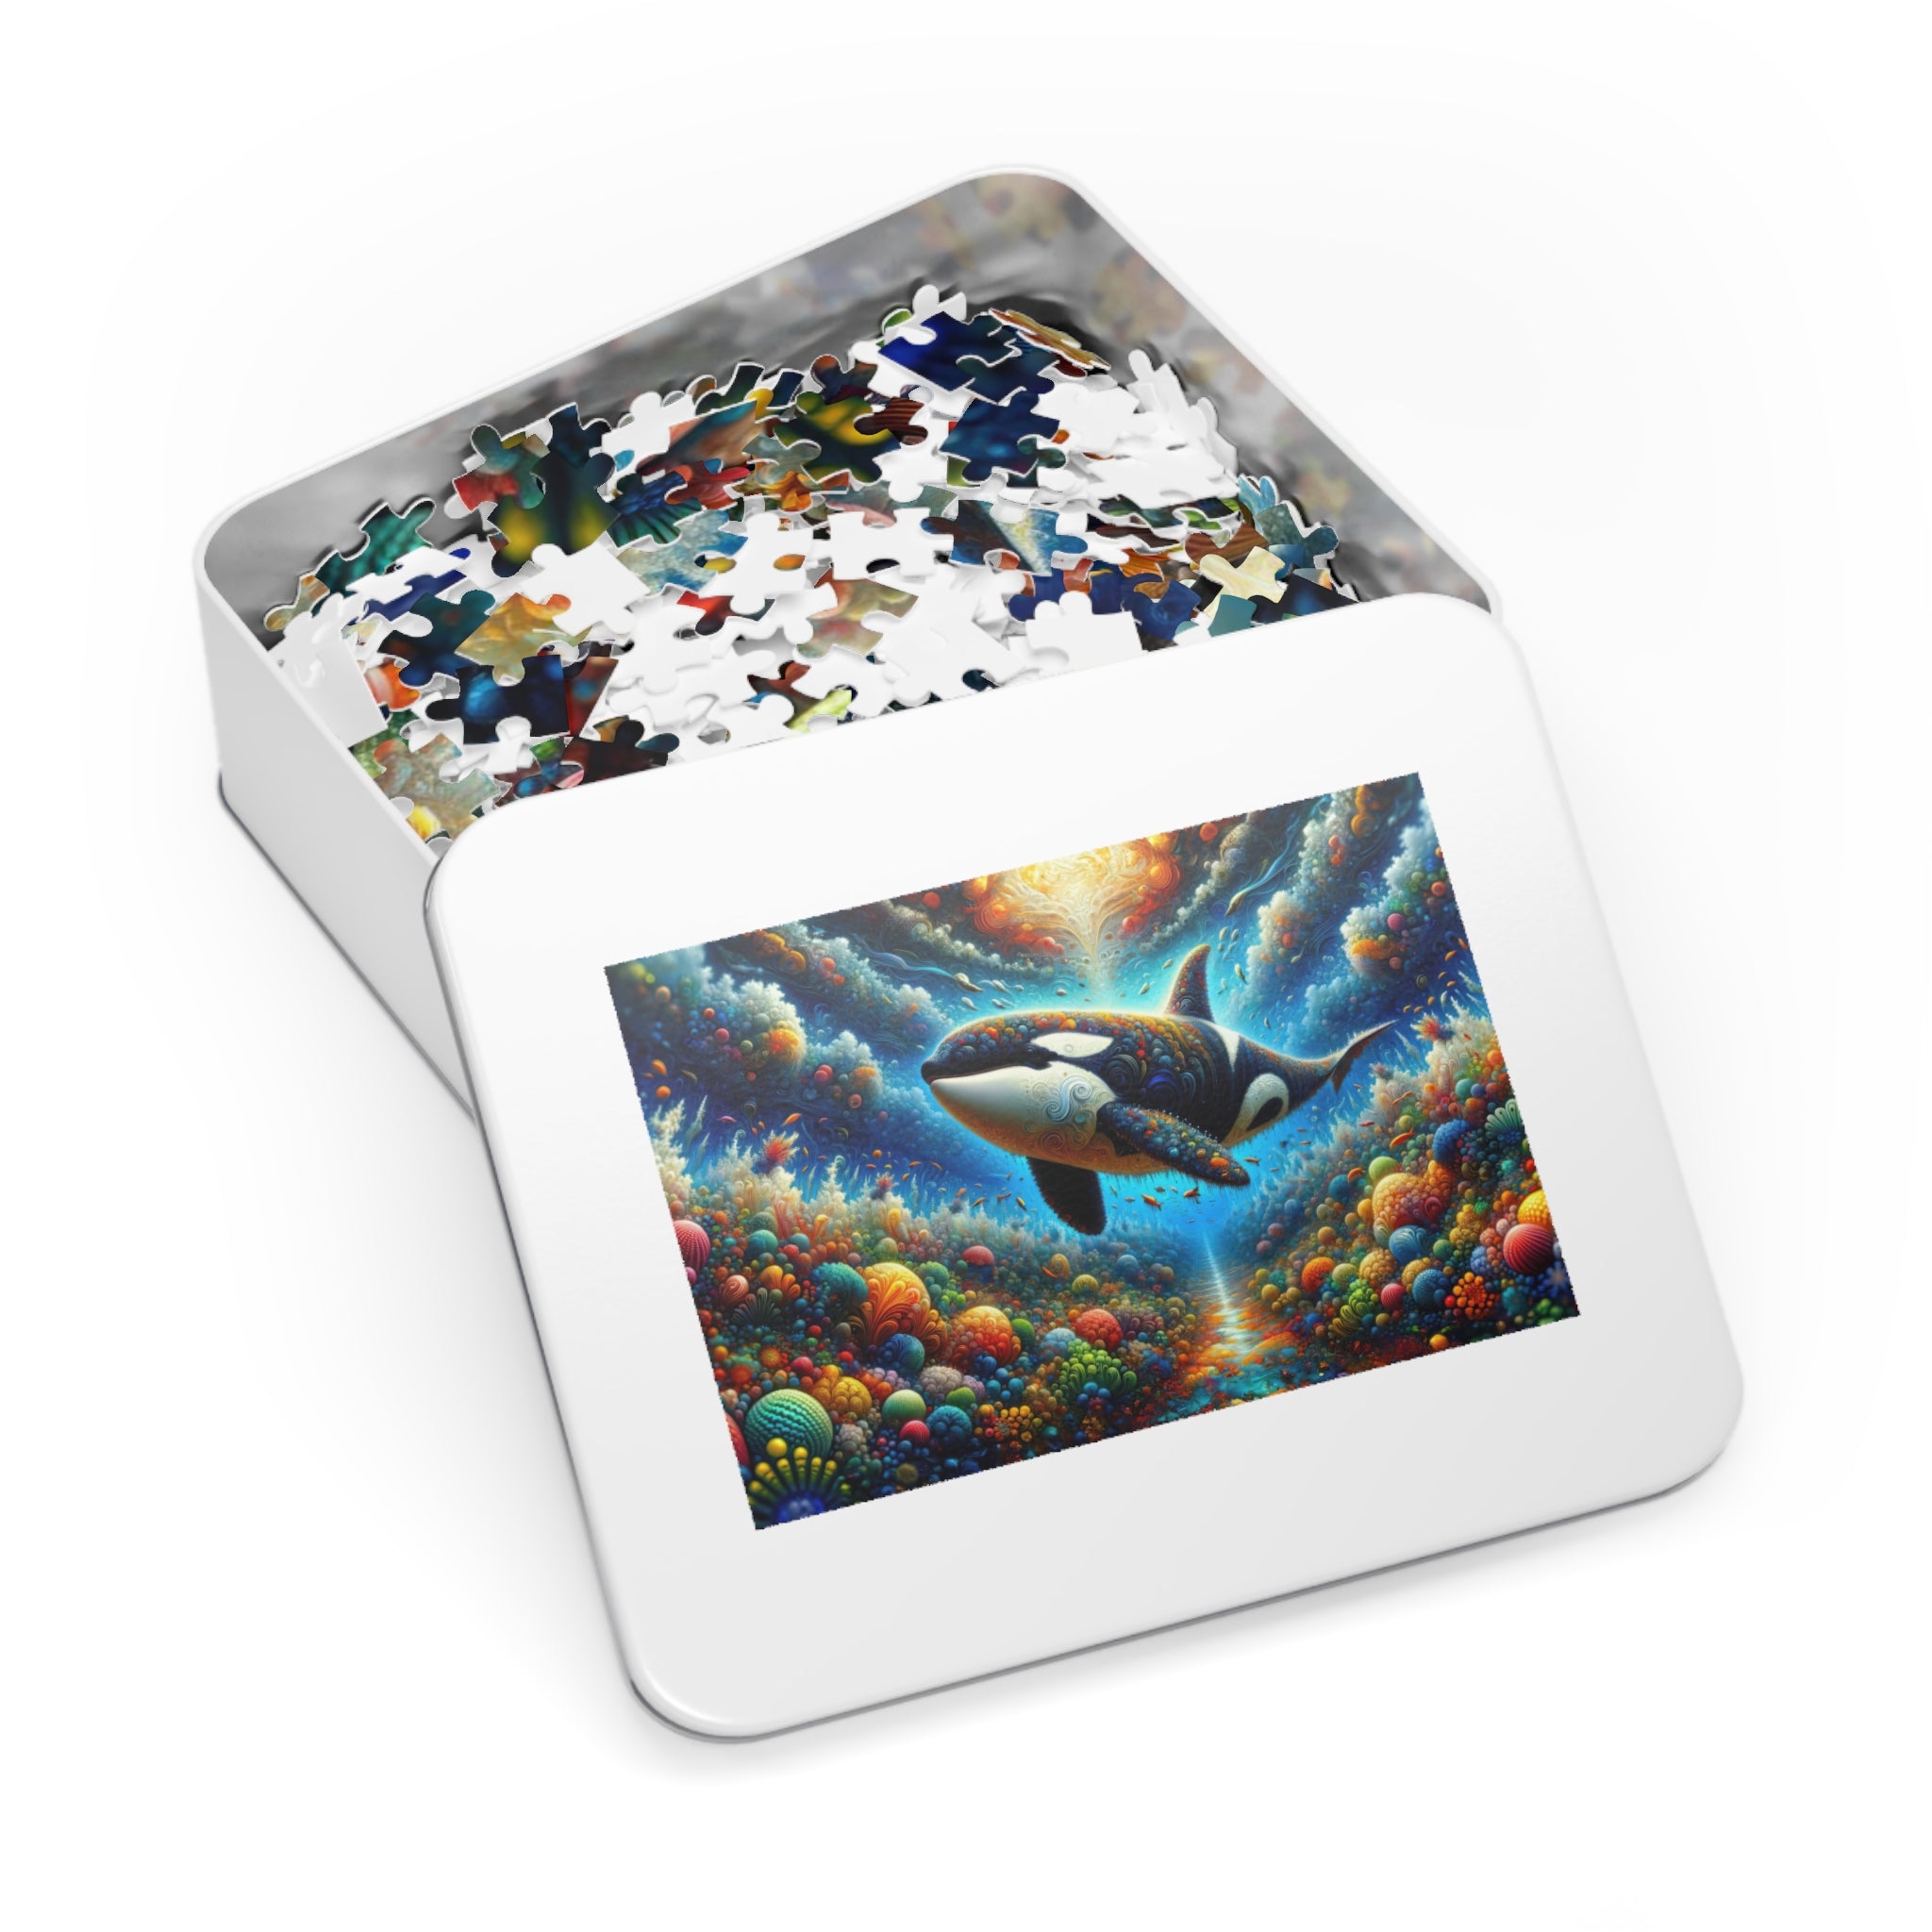 Reef of Reveries Jigsaw Puzzle